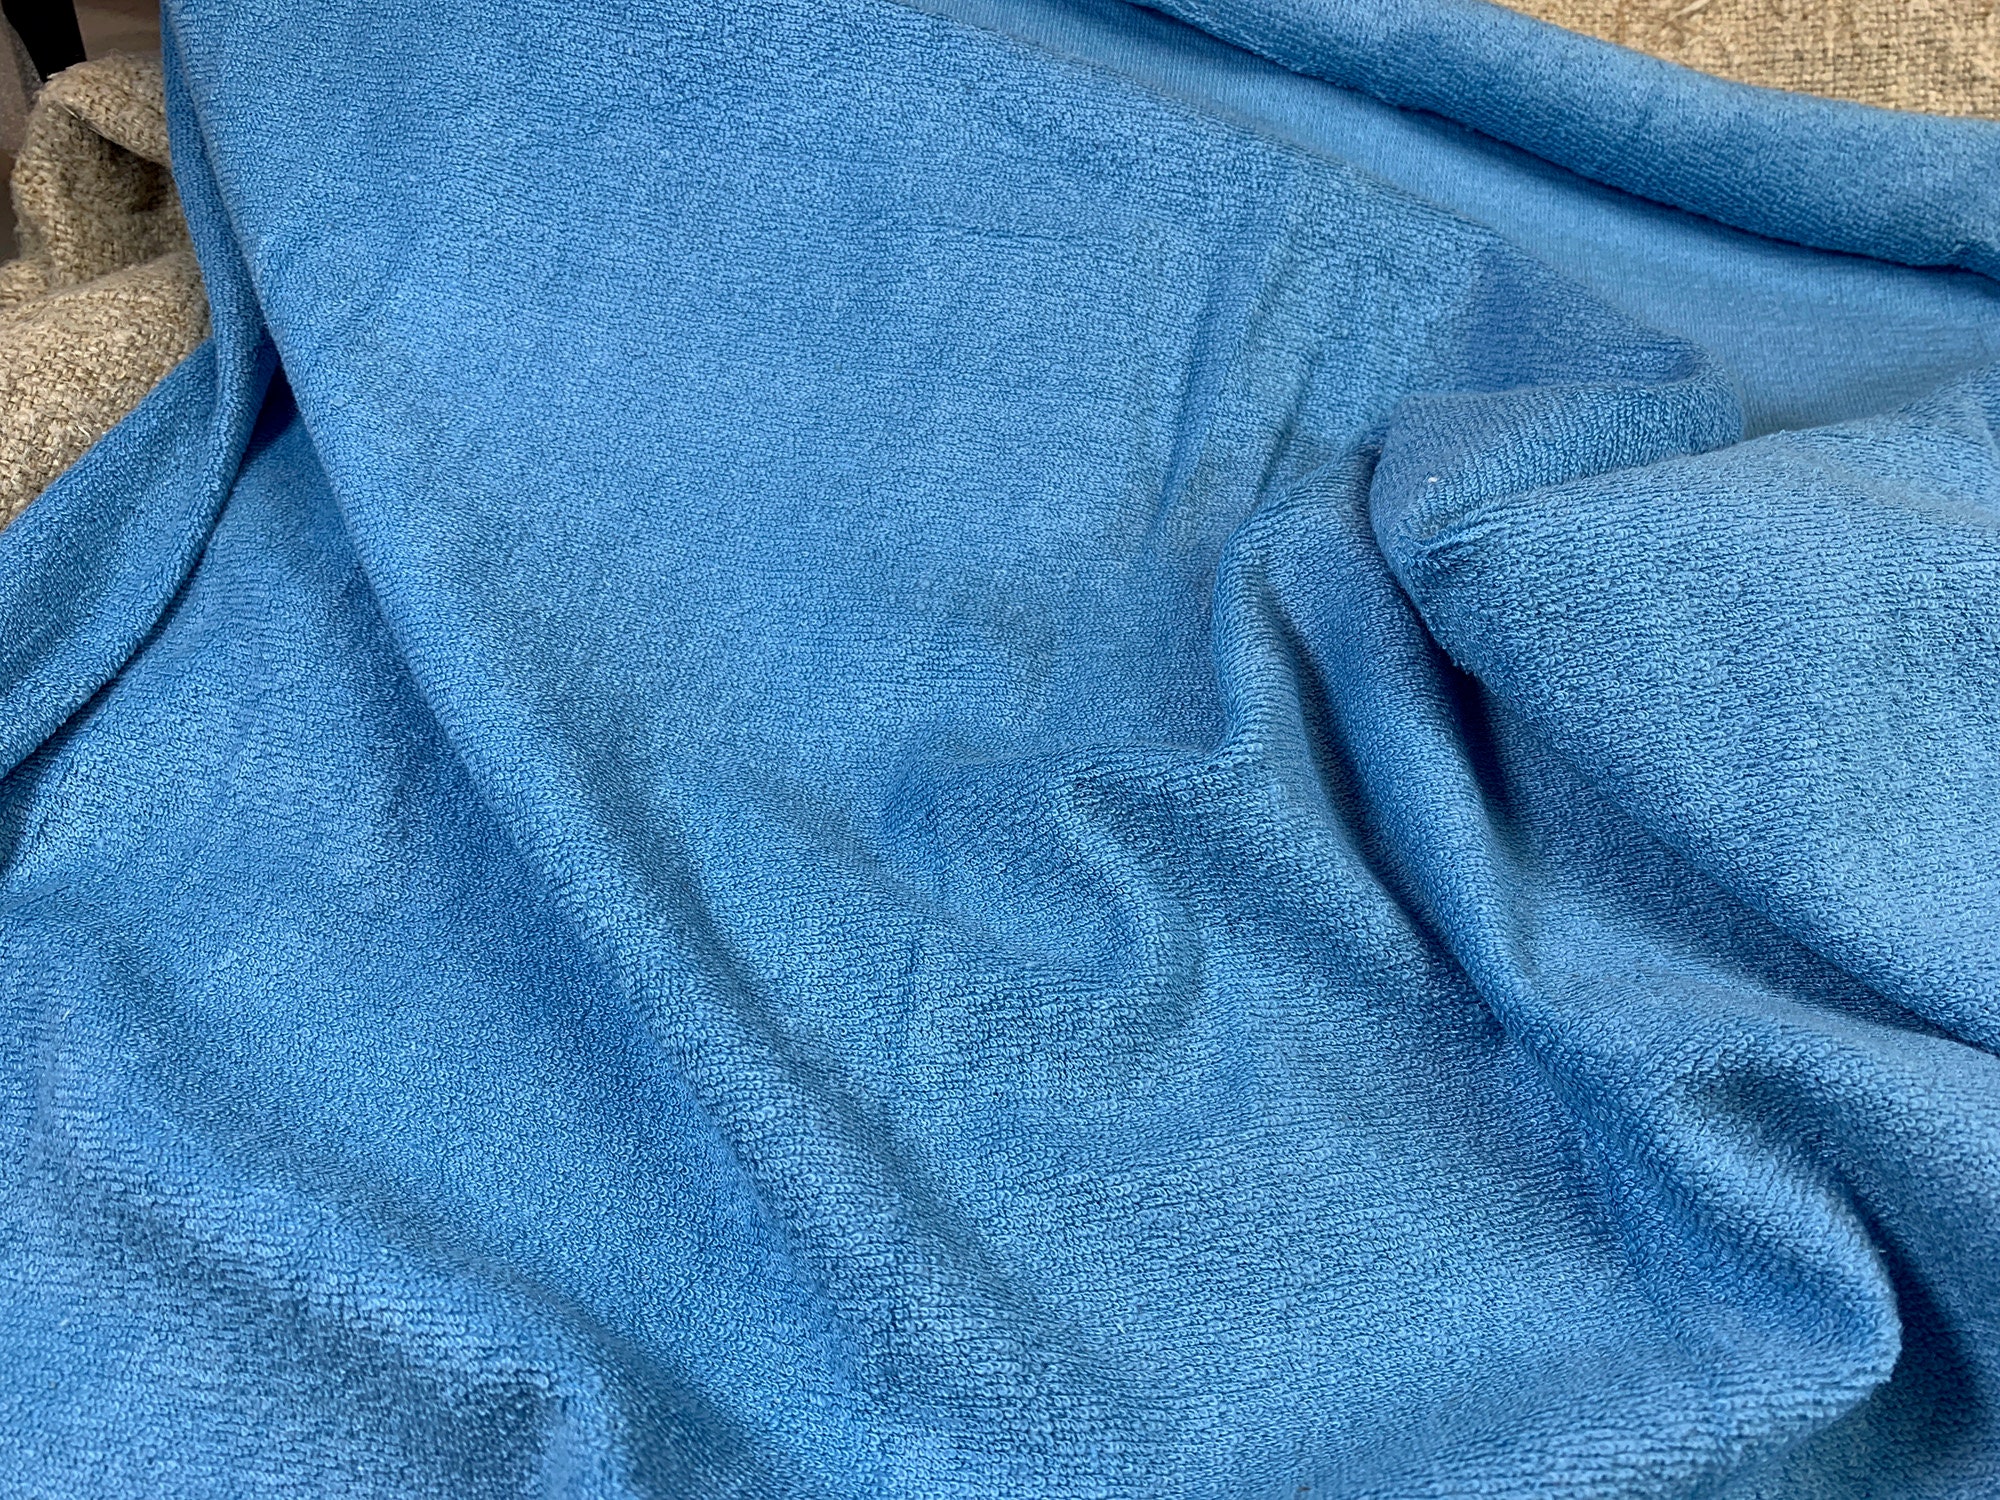 Vintage Cornflower Blue Terry Cloth Fabric // 18 Long X 66 Around Unused  Looped Pile, Stretch Knit 